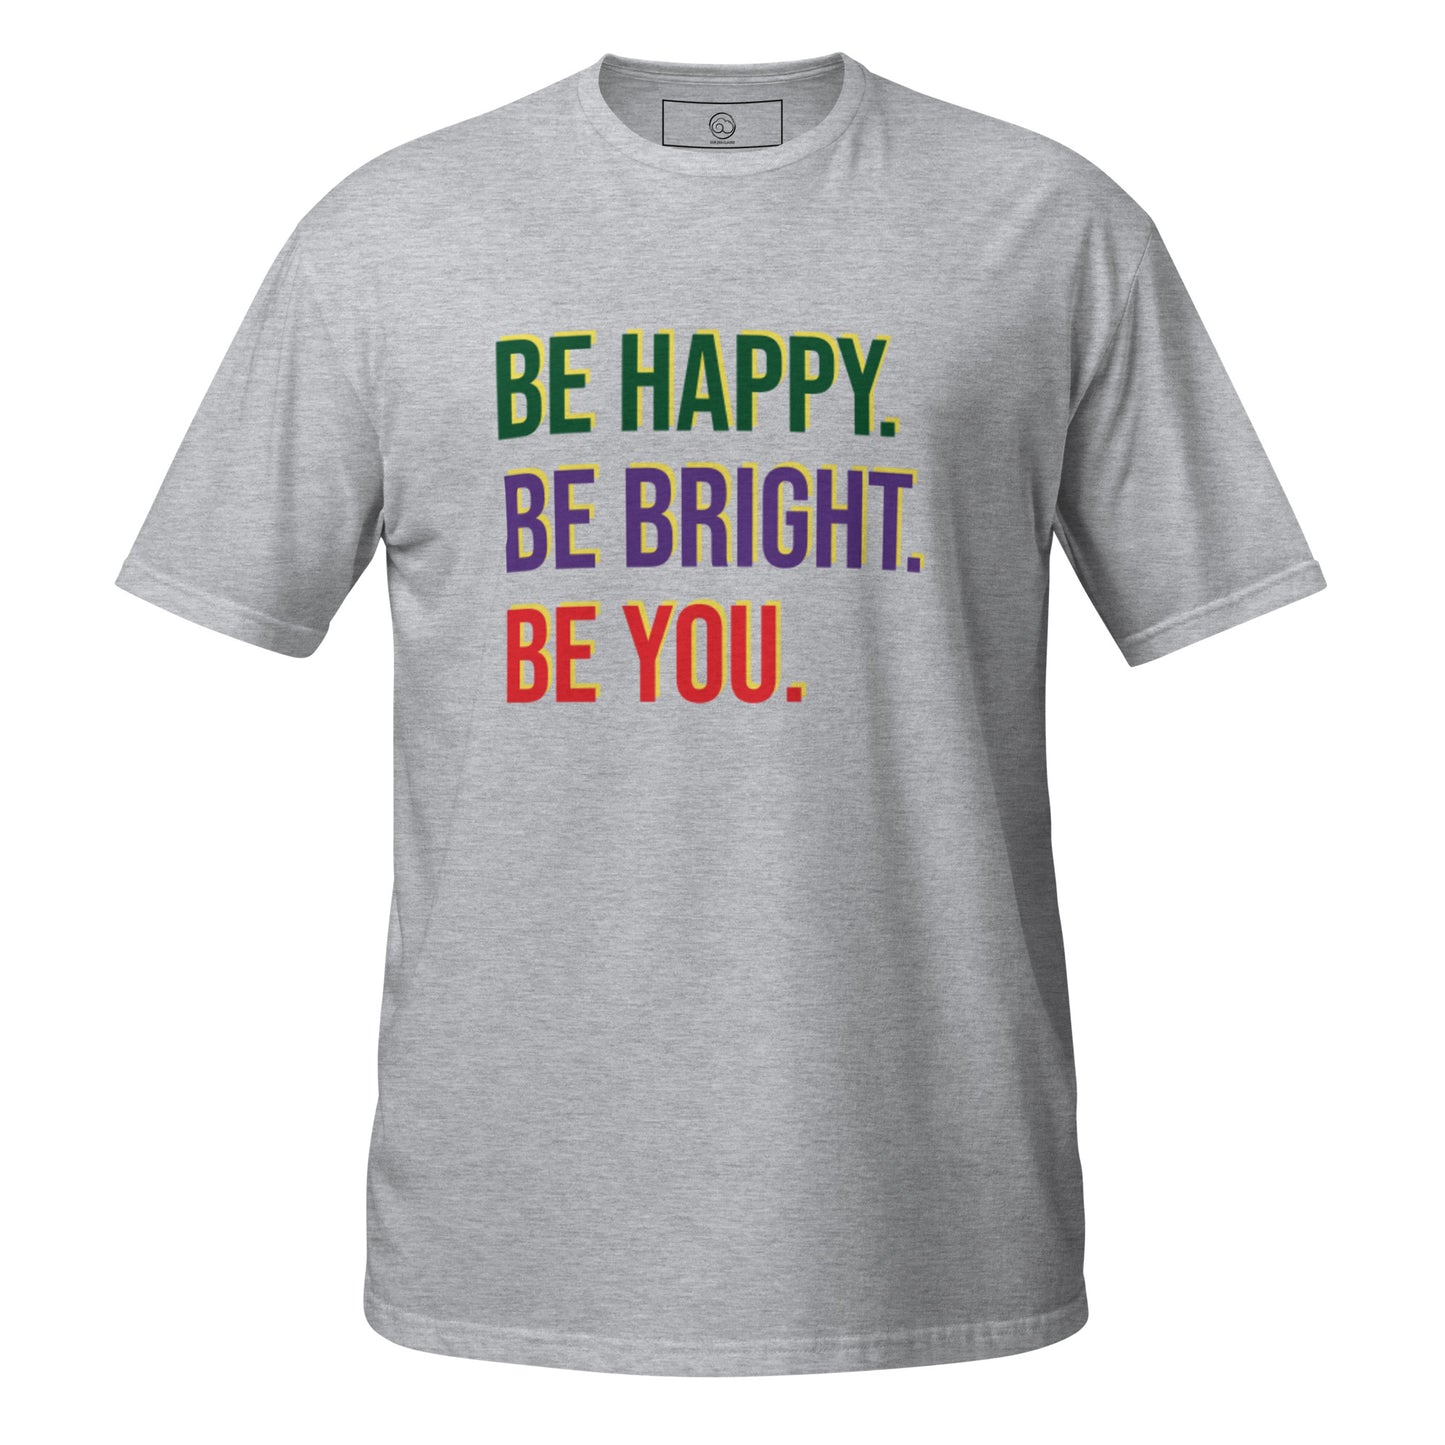 Be Bright. Be Happy. Be You Short-Sleeve T-Shirt